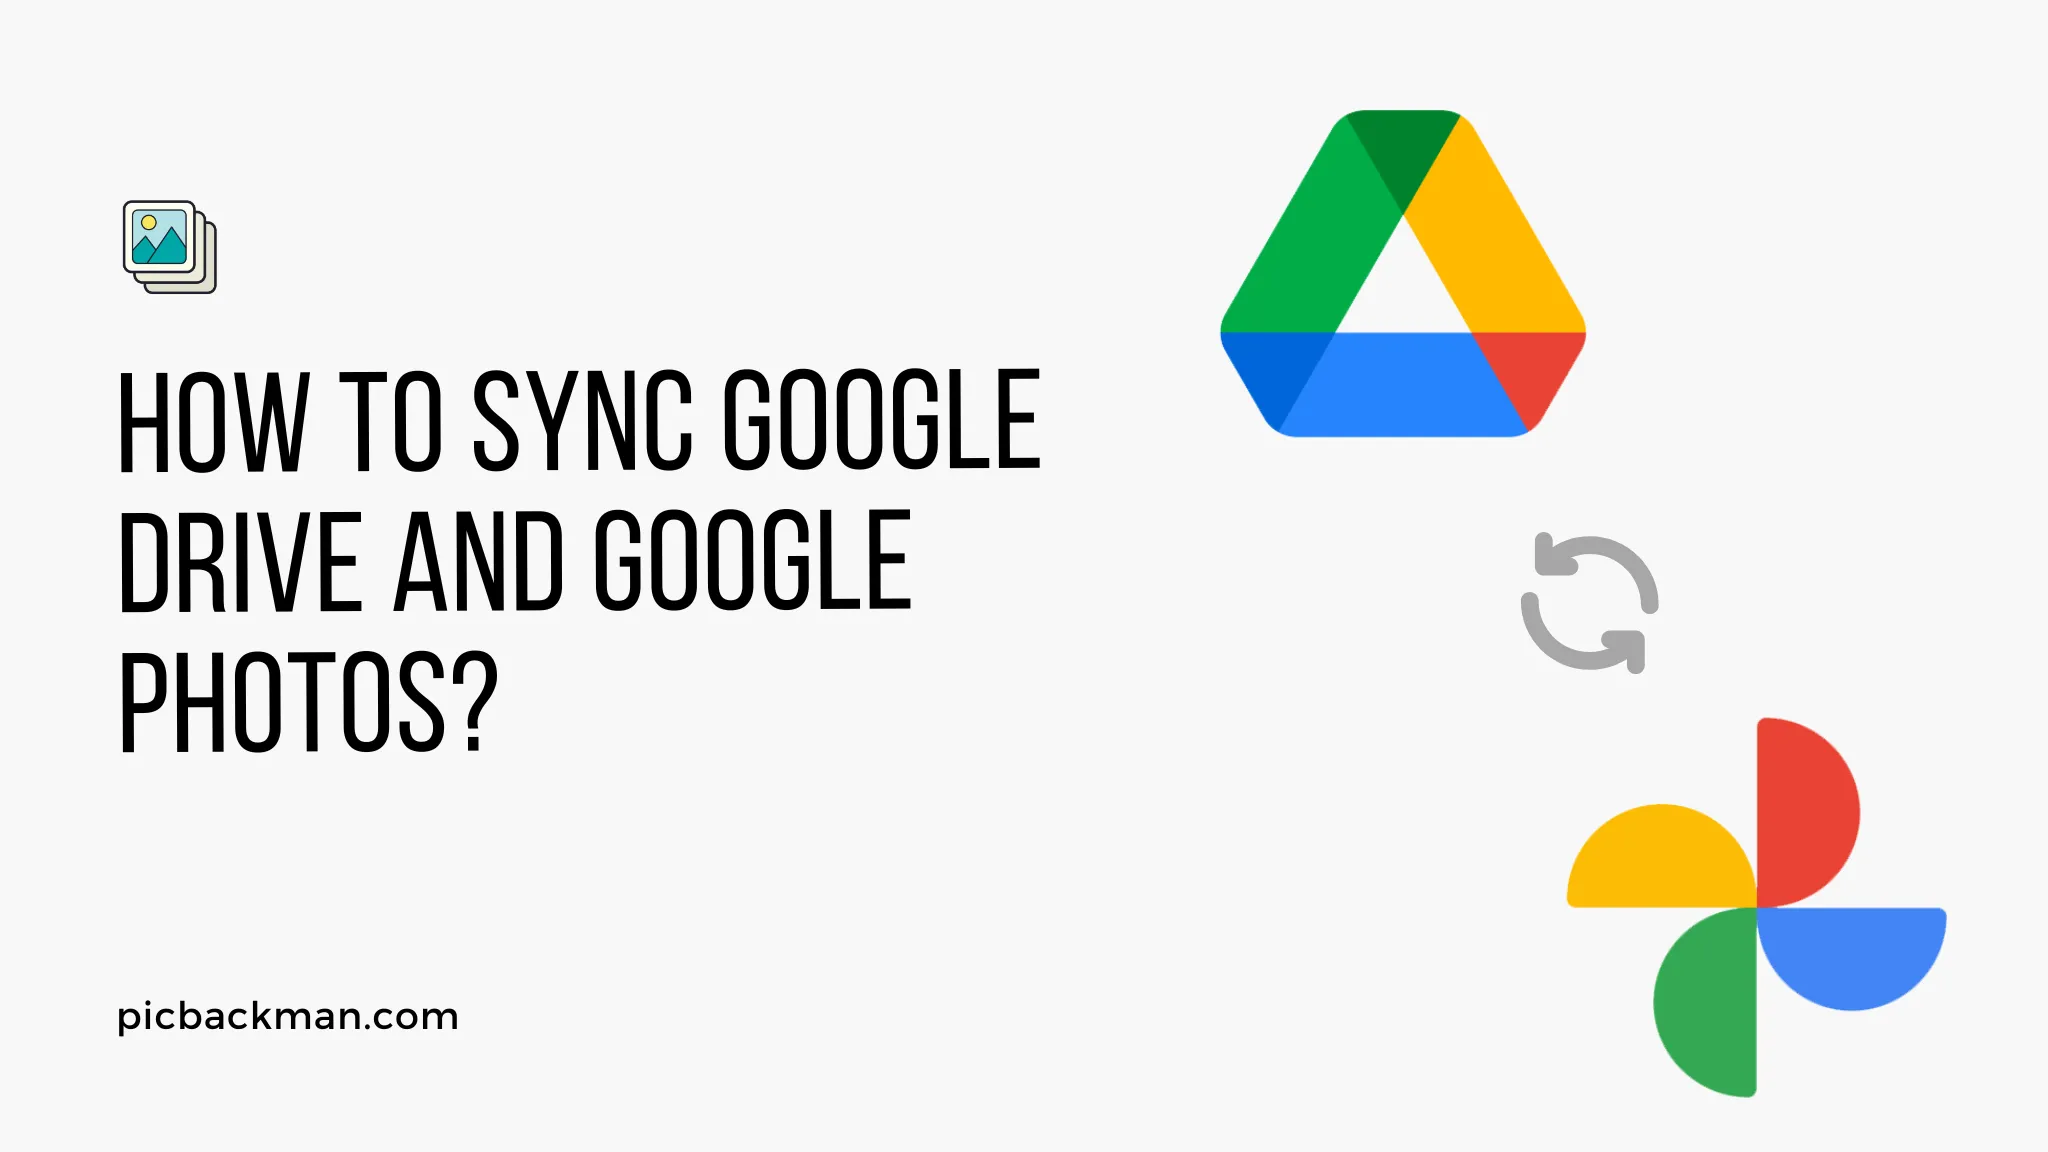 How to sync Google Drive and Google Photos